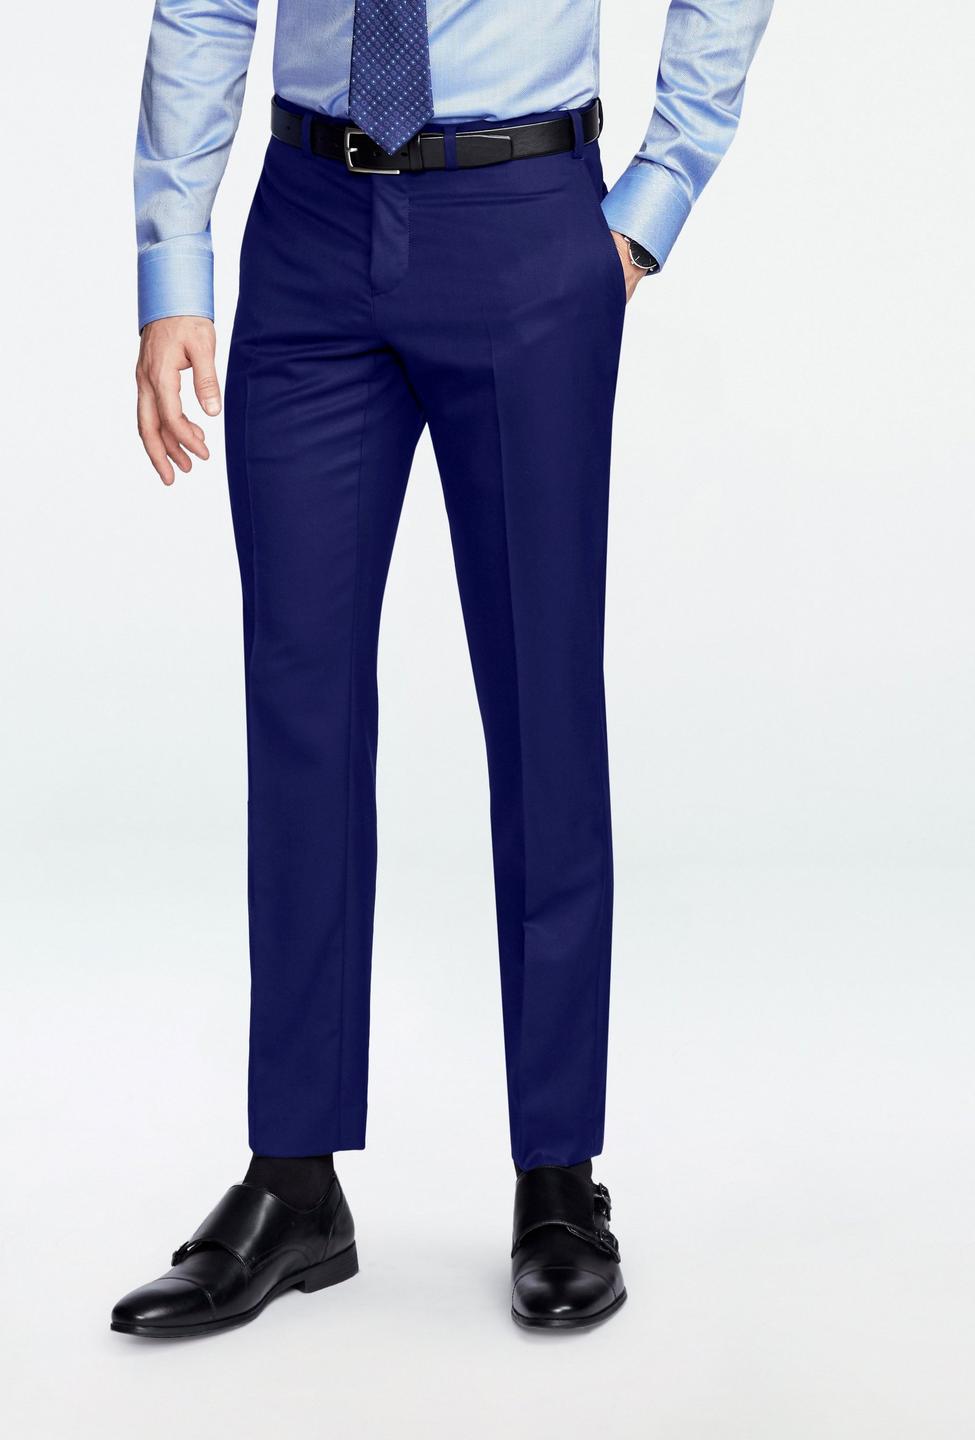 Blue pants - Solid Design from Luxury Indochino Collection